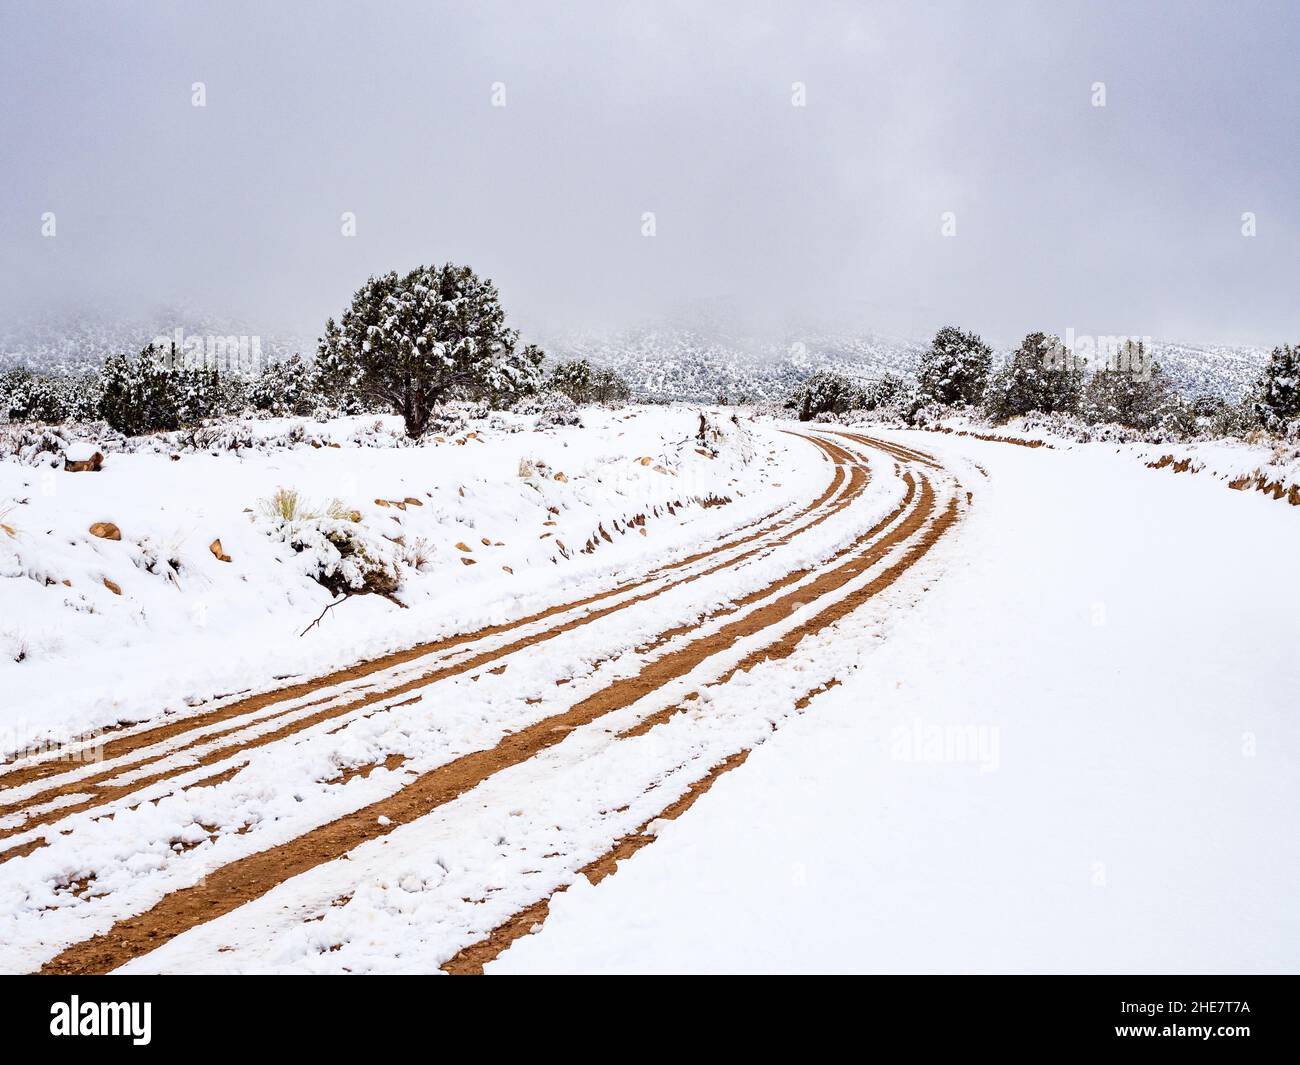 House Rock Road north of Highway 89A in Arizona with snow covering and ruts. Winter storm clouds in distance. Stock Photo